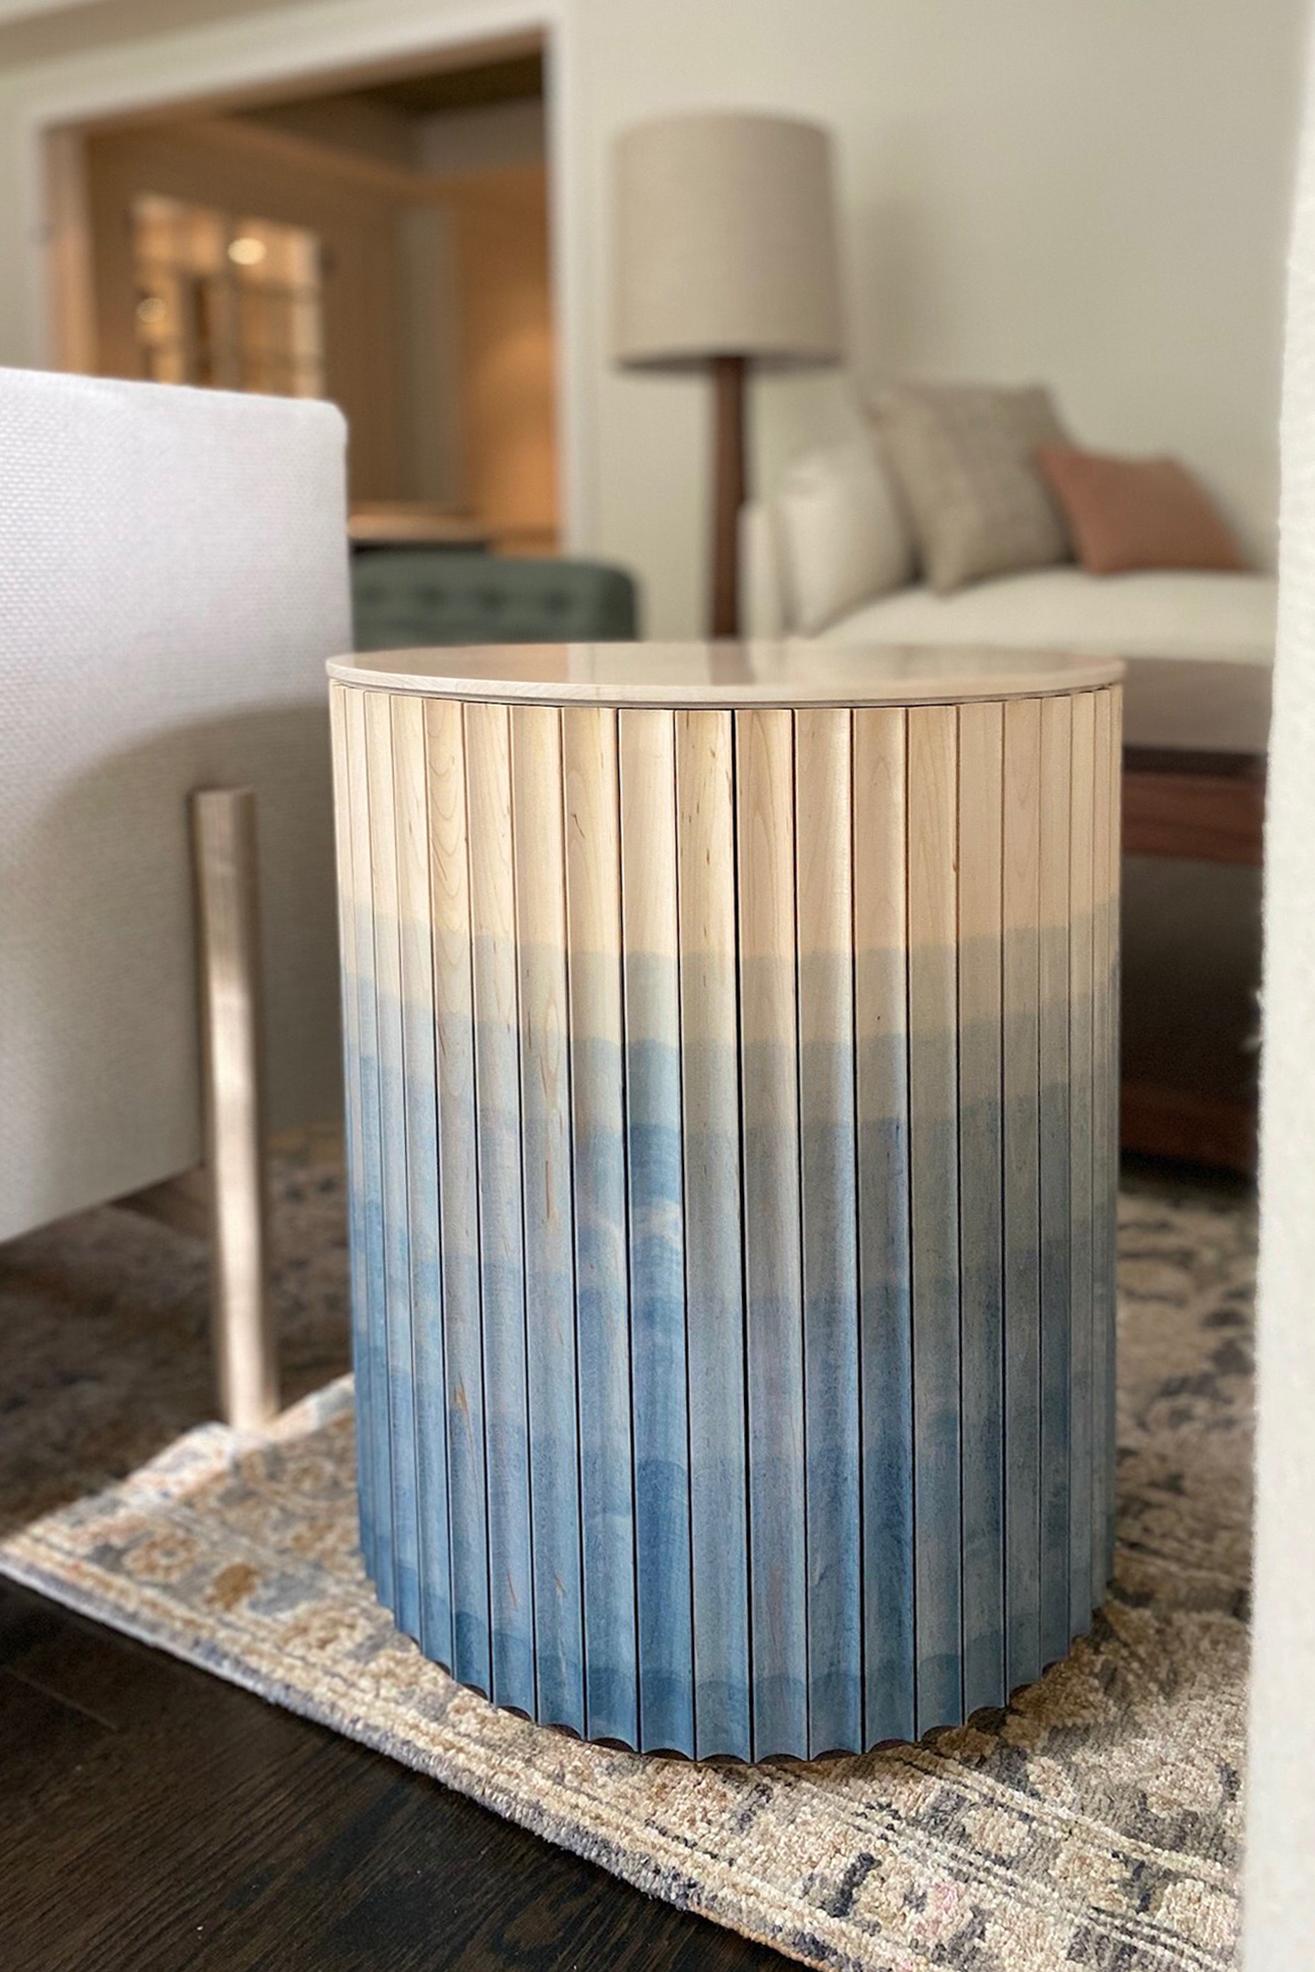 Pilar Round End Table / Cobalt Blue Ombré Maple Wood / Crema Marble Top by INDO- In New Condition For Sale In Rumford, RI